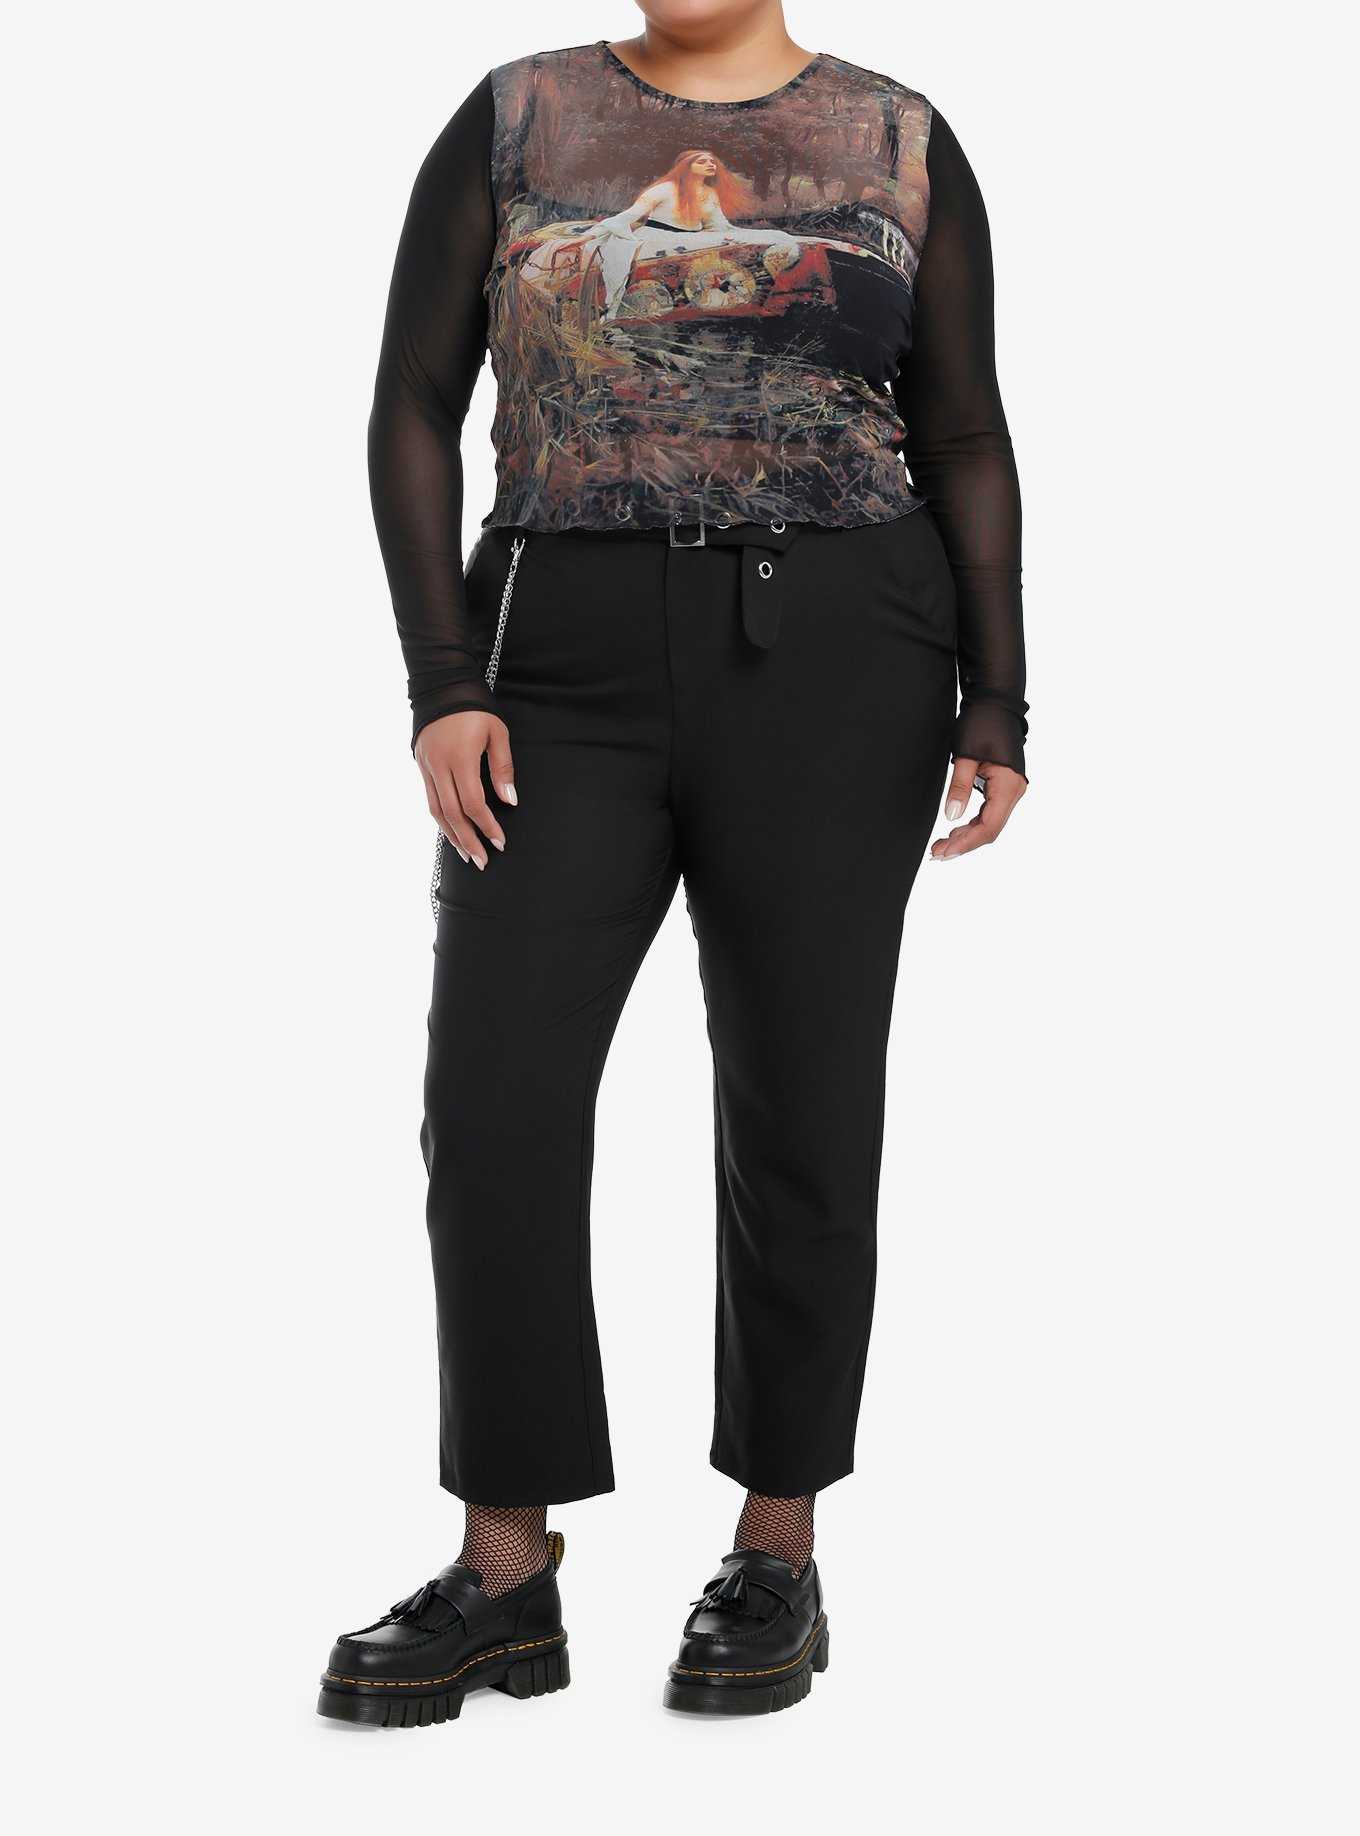 The Lady Of Shalott Mesh Twofer Long-Sleeve Top Plus Size, , hi-res